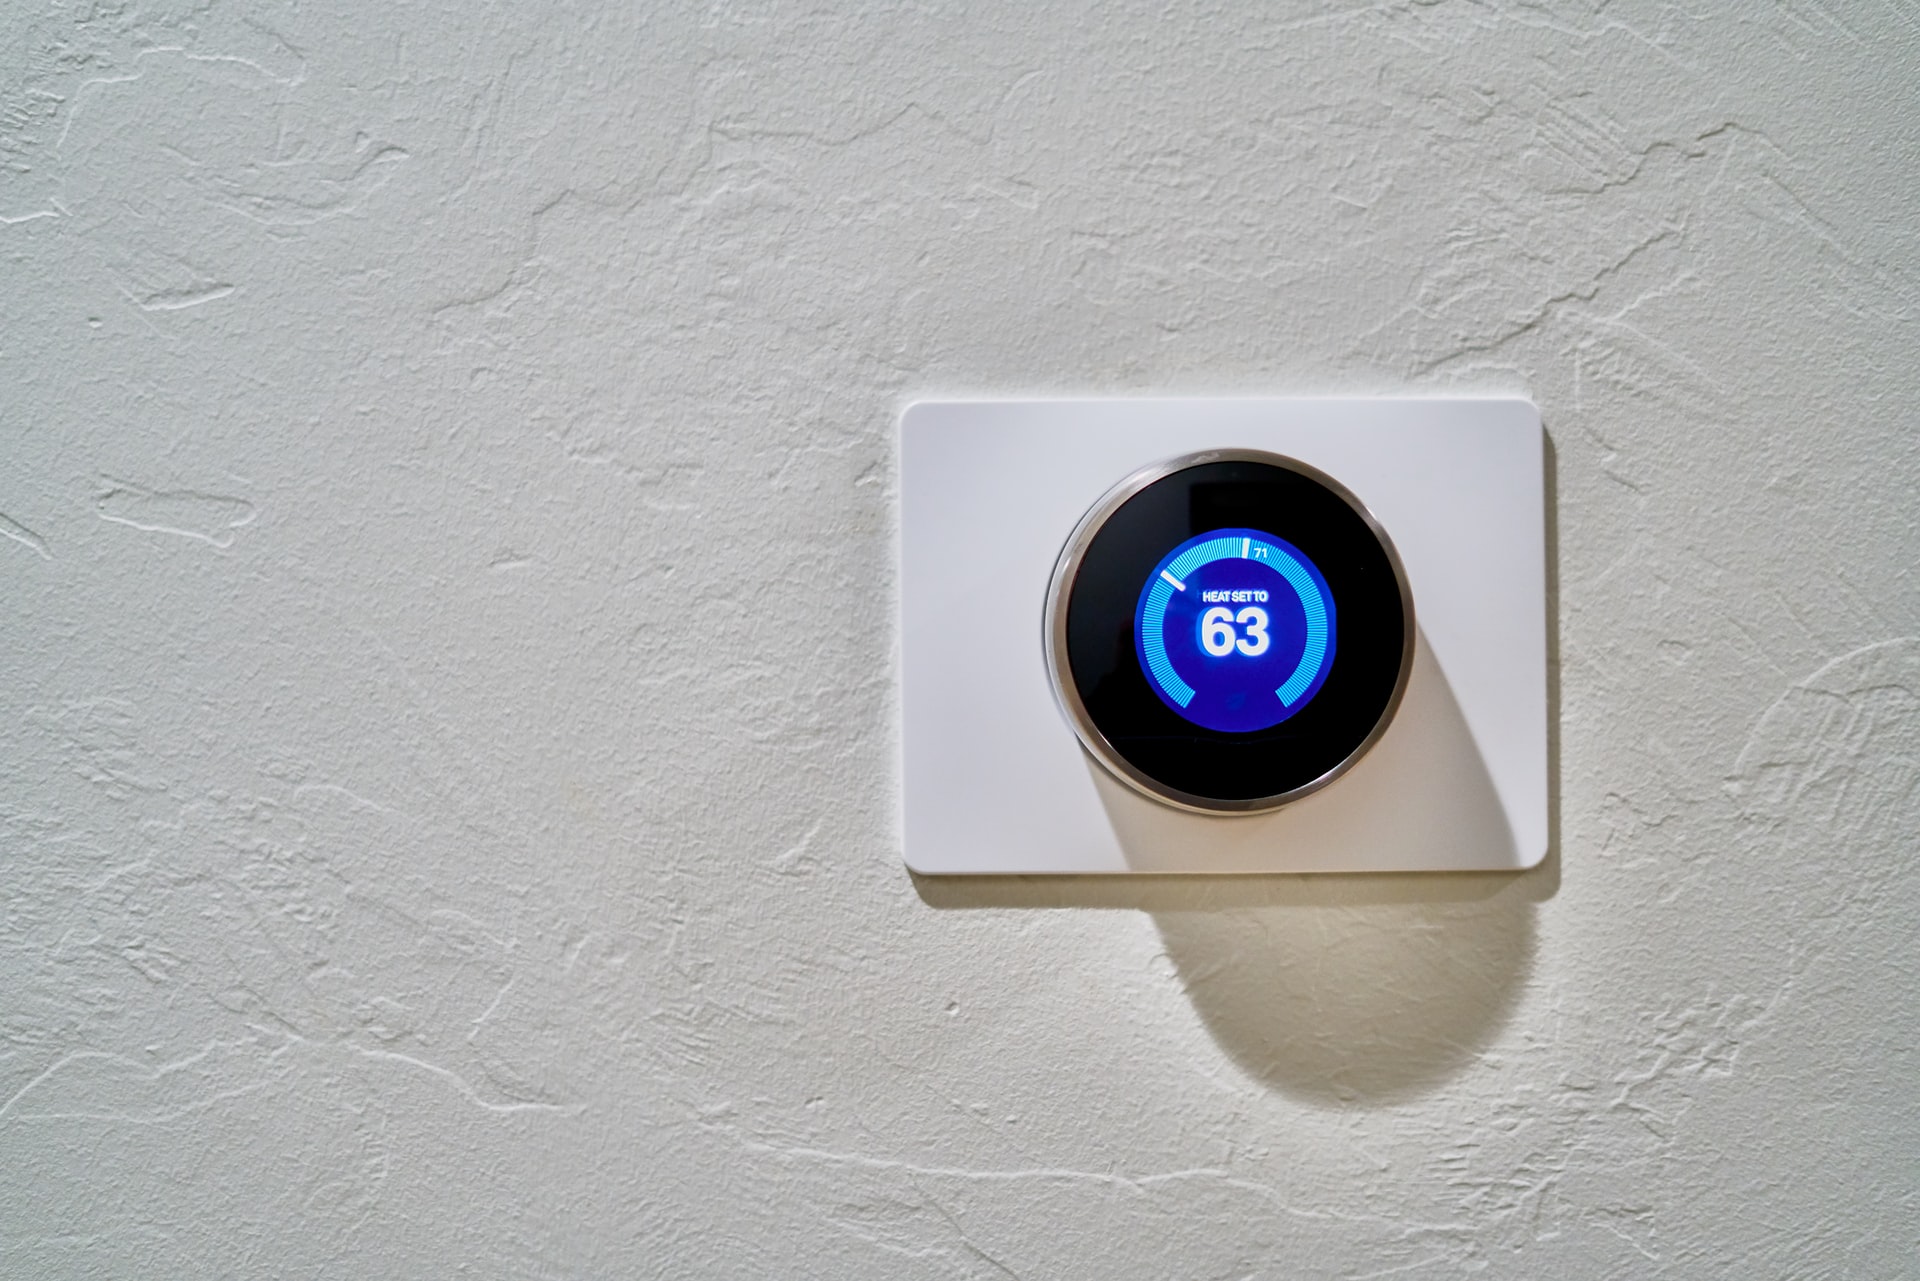 How To Connect Nest Thermostat To Wi-Fi?